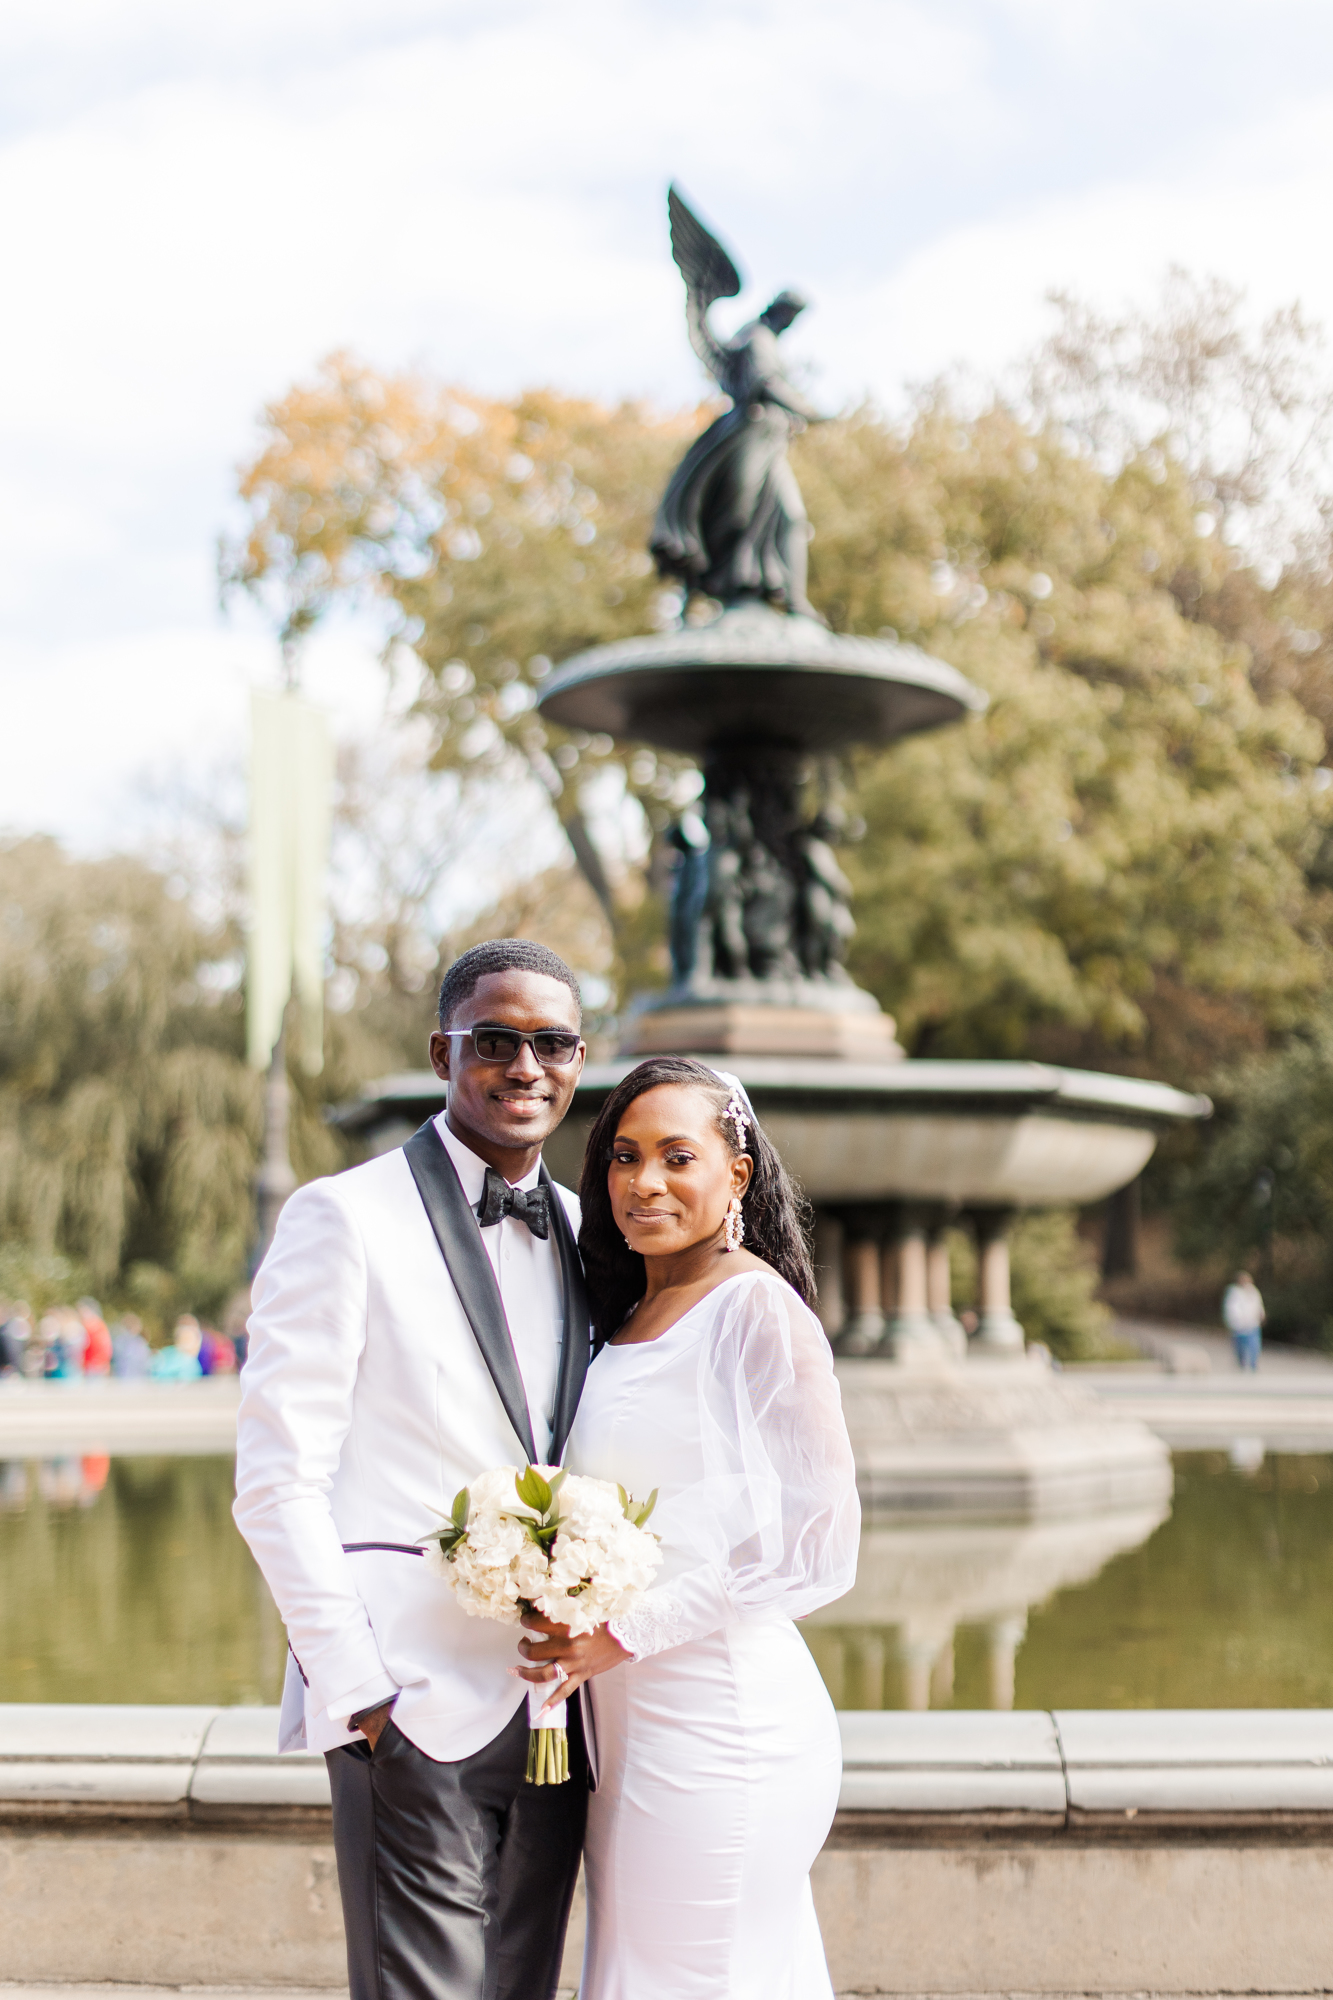 Amazing Central Park Wedding Photos on Cherry Hill in Fall